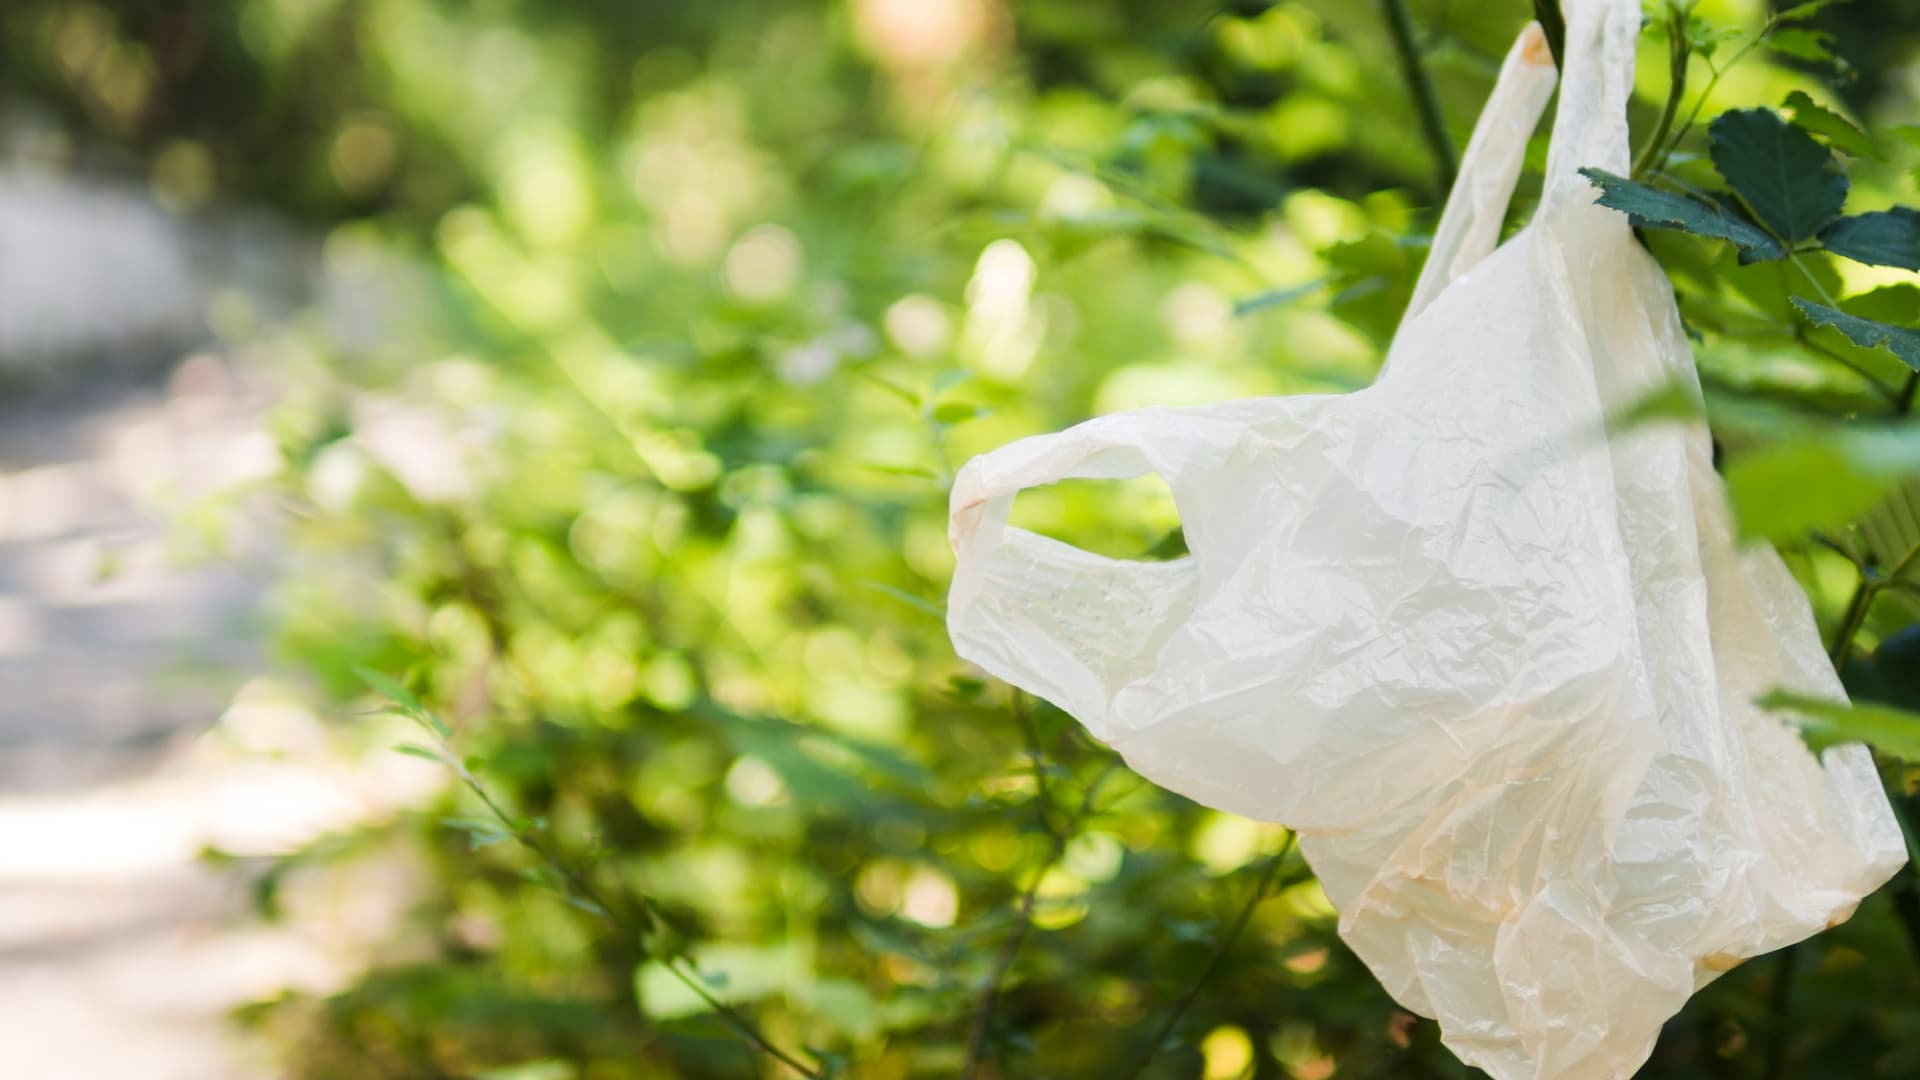 How long does it take for a plastic bag to decompose?